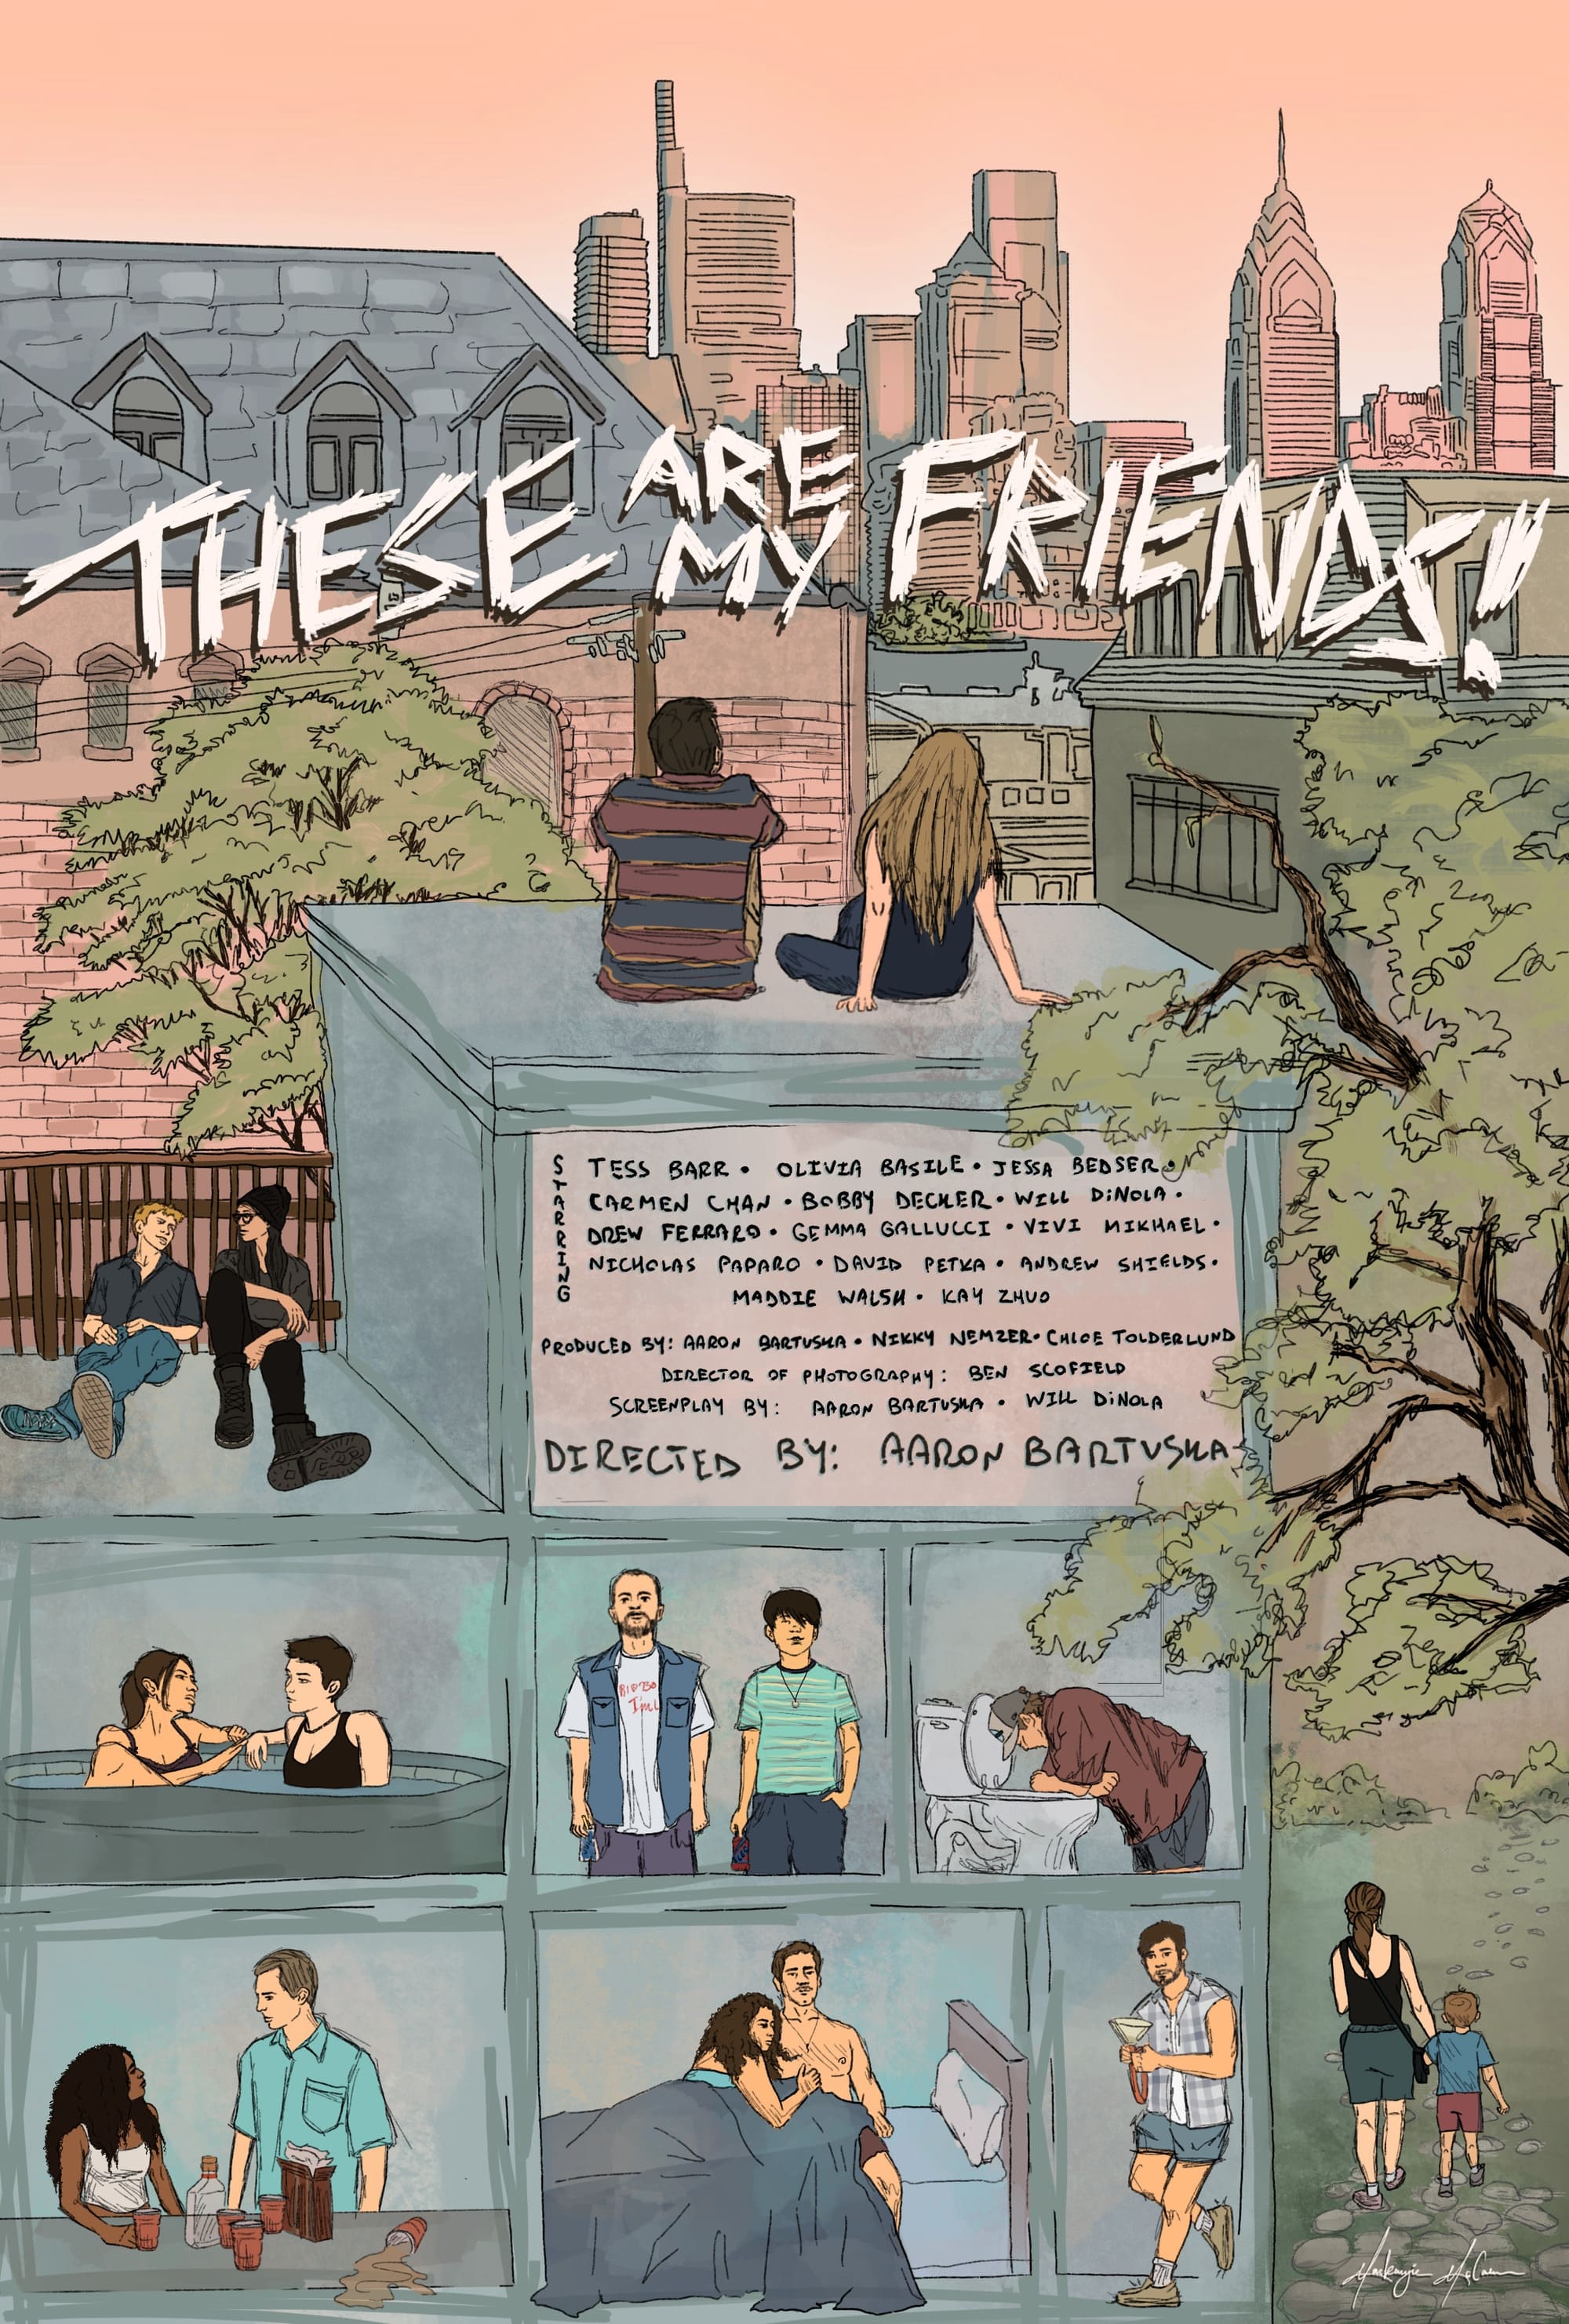 Poster for the movie "These Are My Friends!"